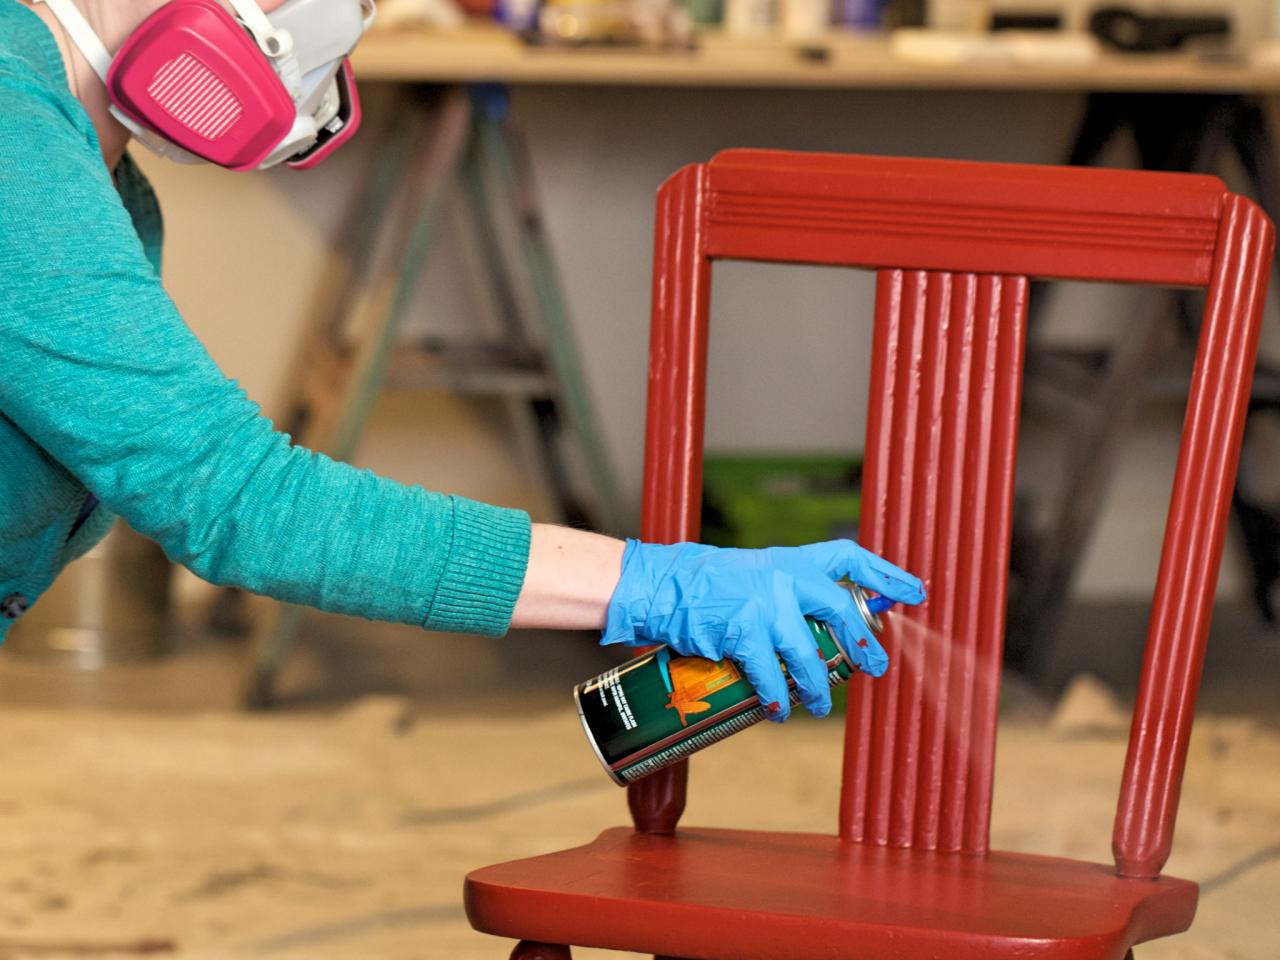 How To Strip And Repaint A Wood Chair How Tos Diy